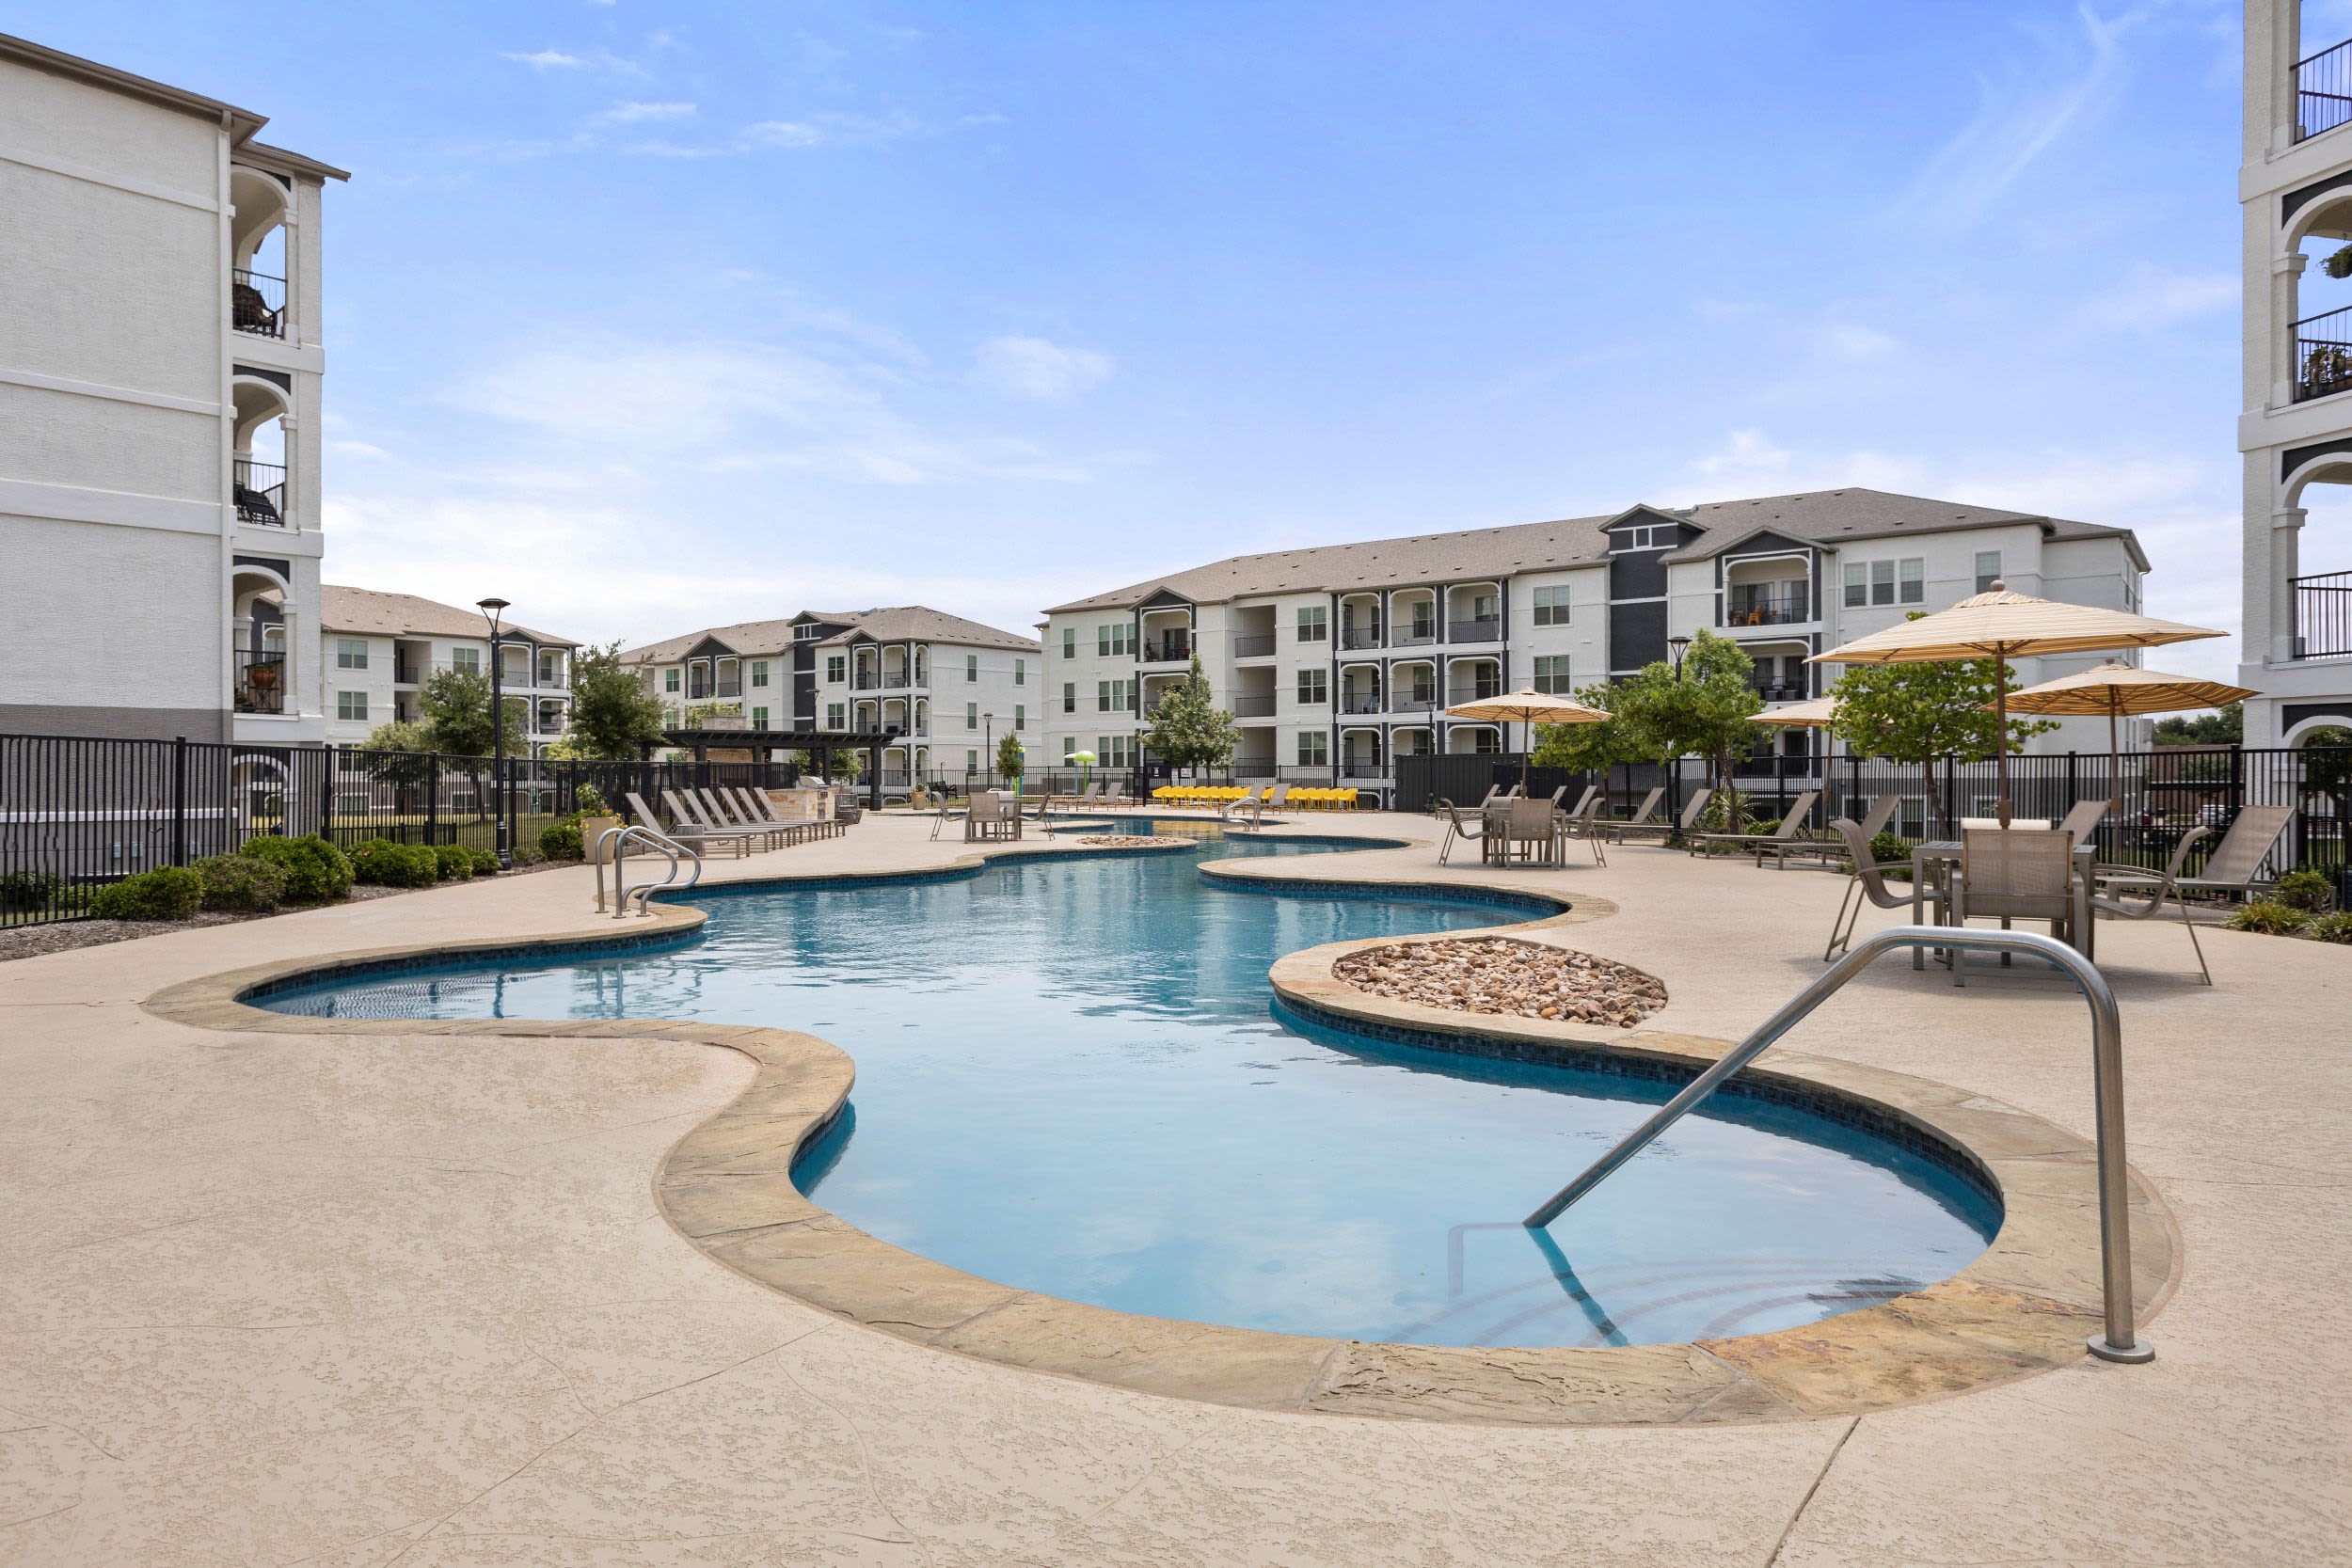 Resort-style swimming pool on another beautiful day at Olympus Woodbridge in Sachse, Texas